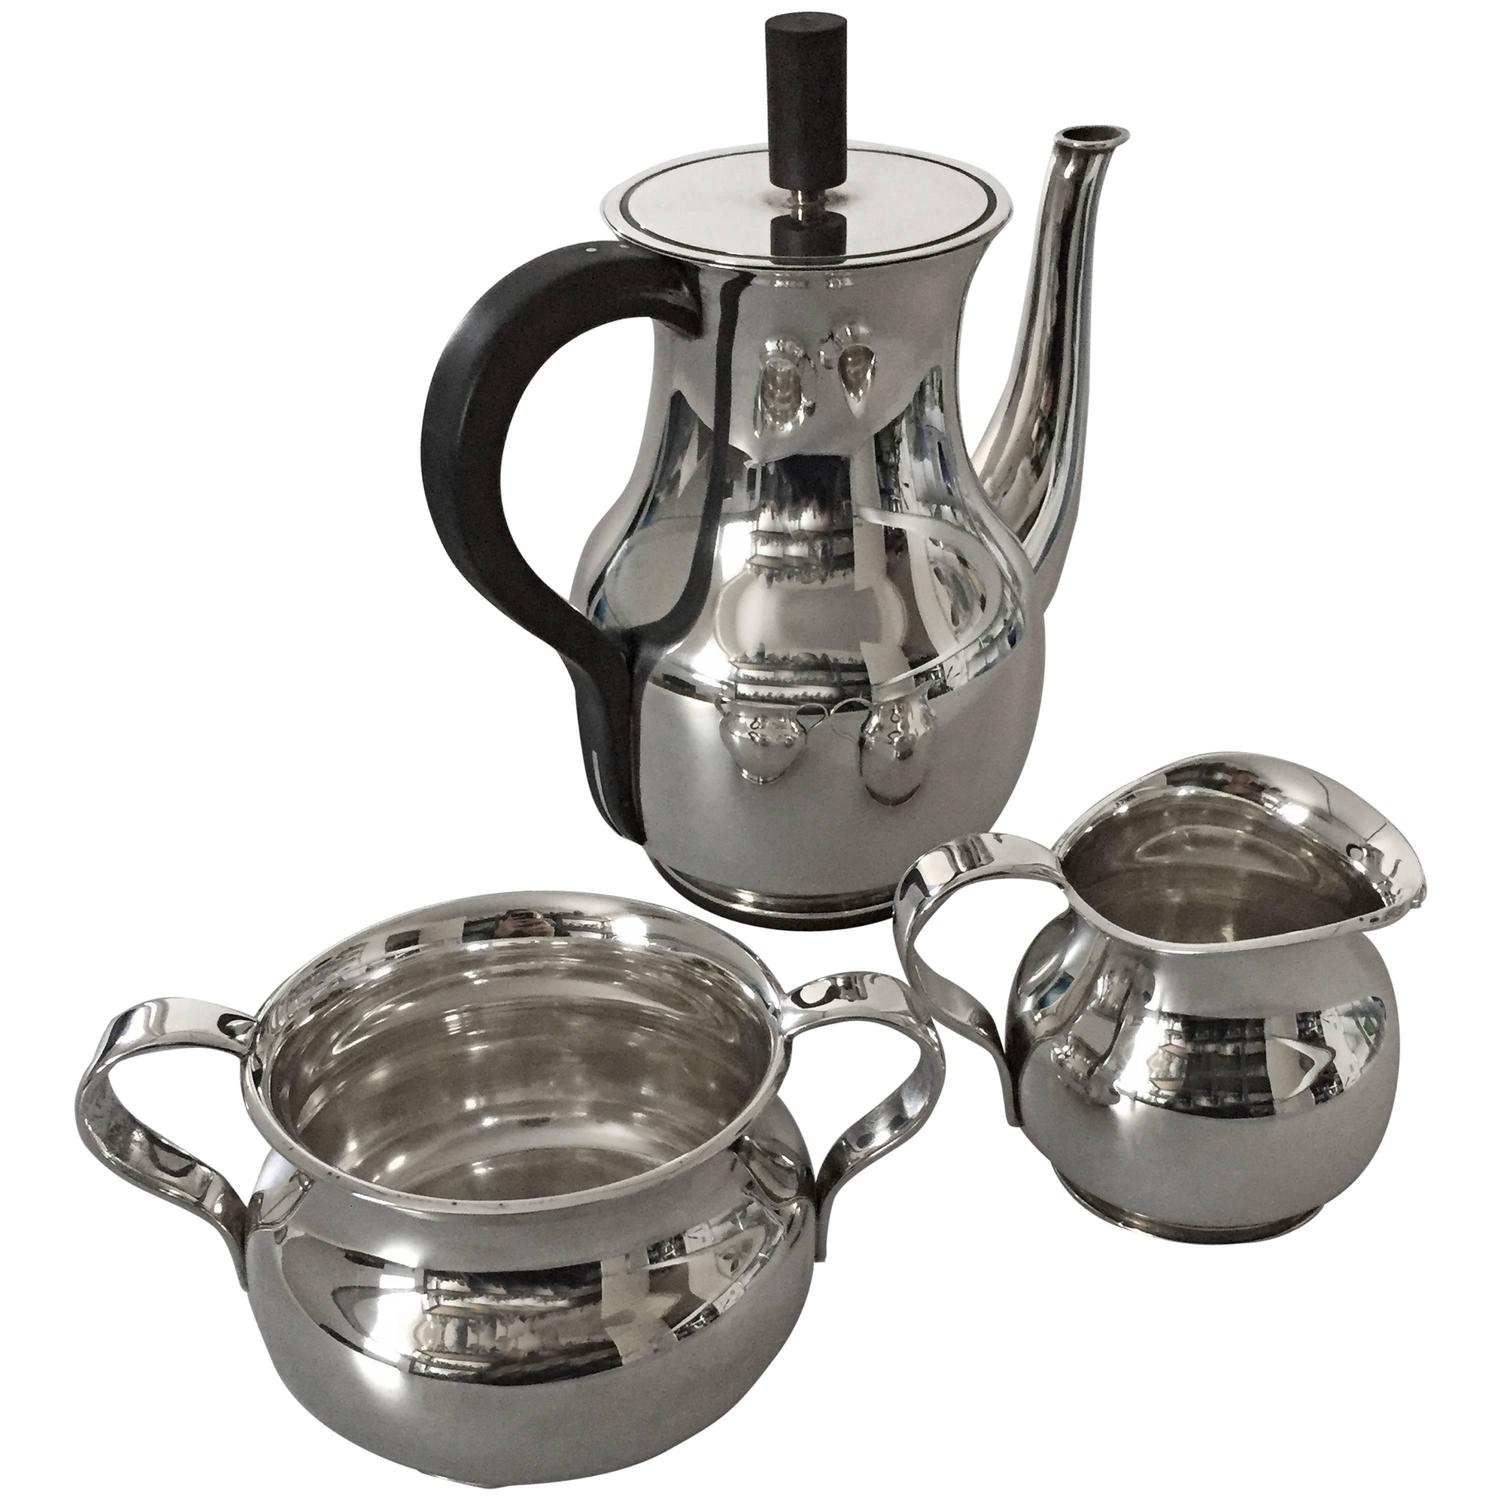 Hingelberg 1930s Sterling Silver Coffee Set For Sale at 1stdibs